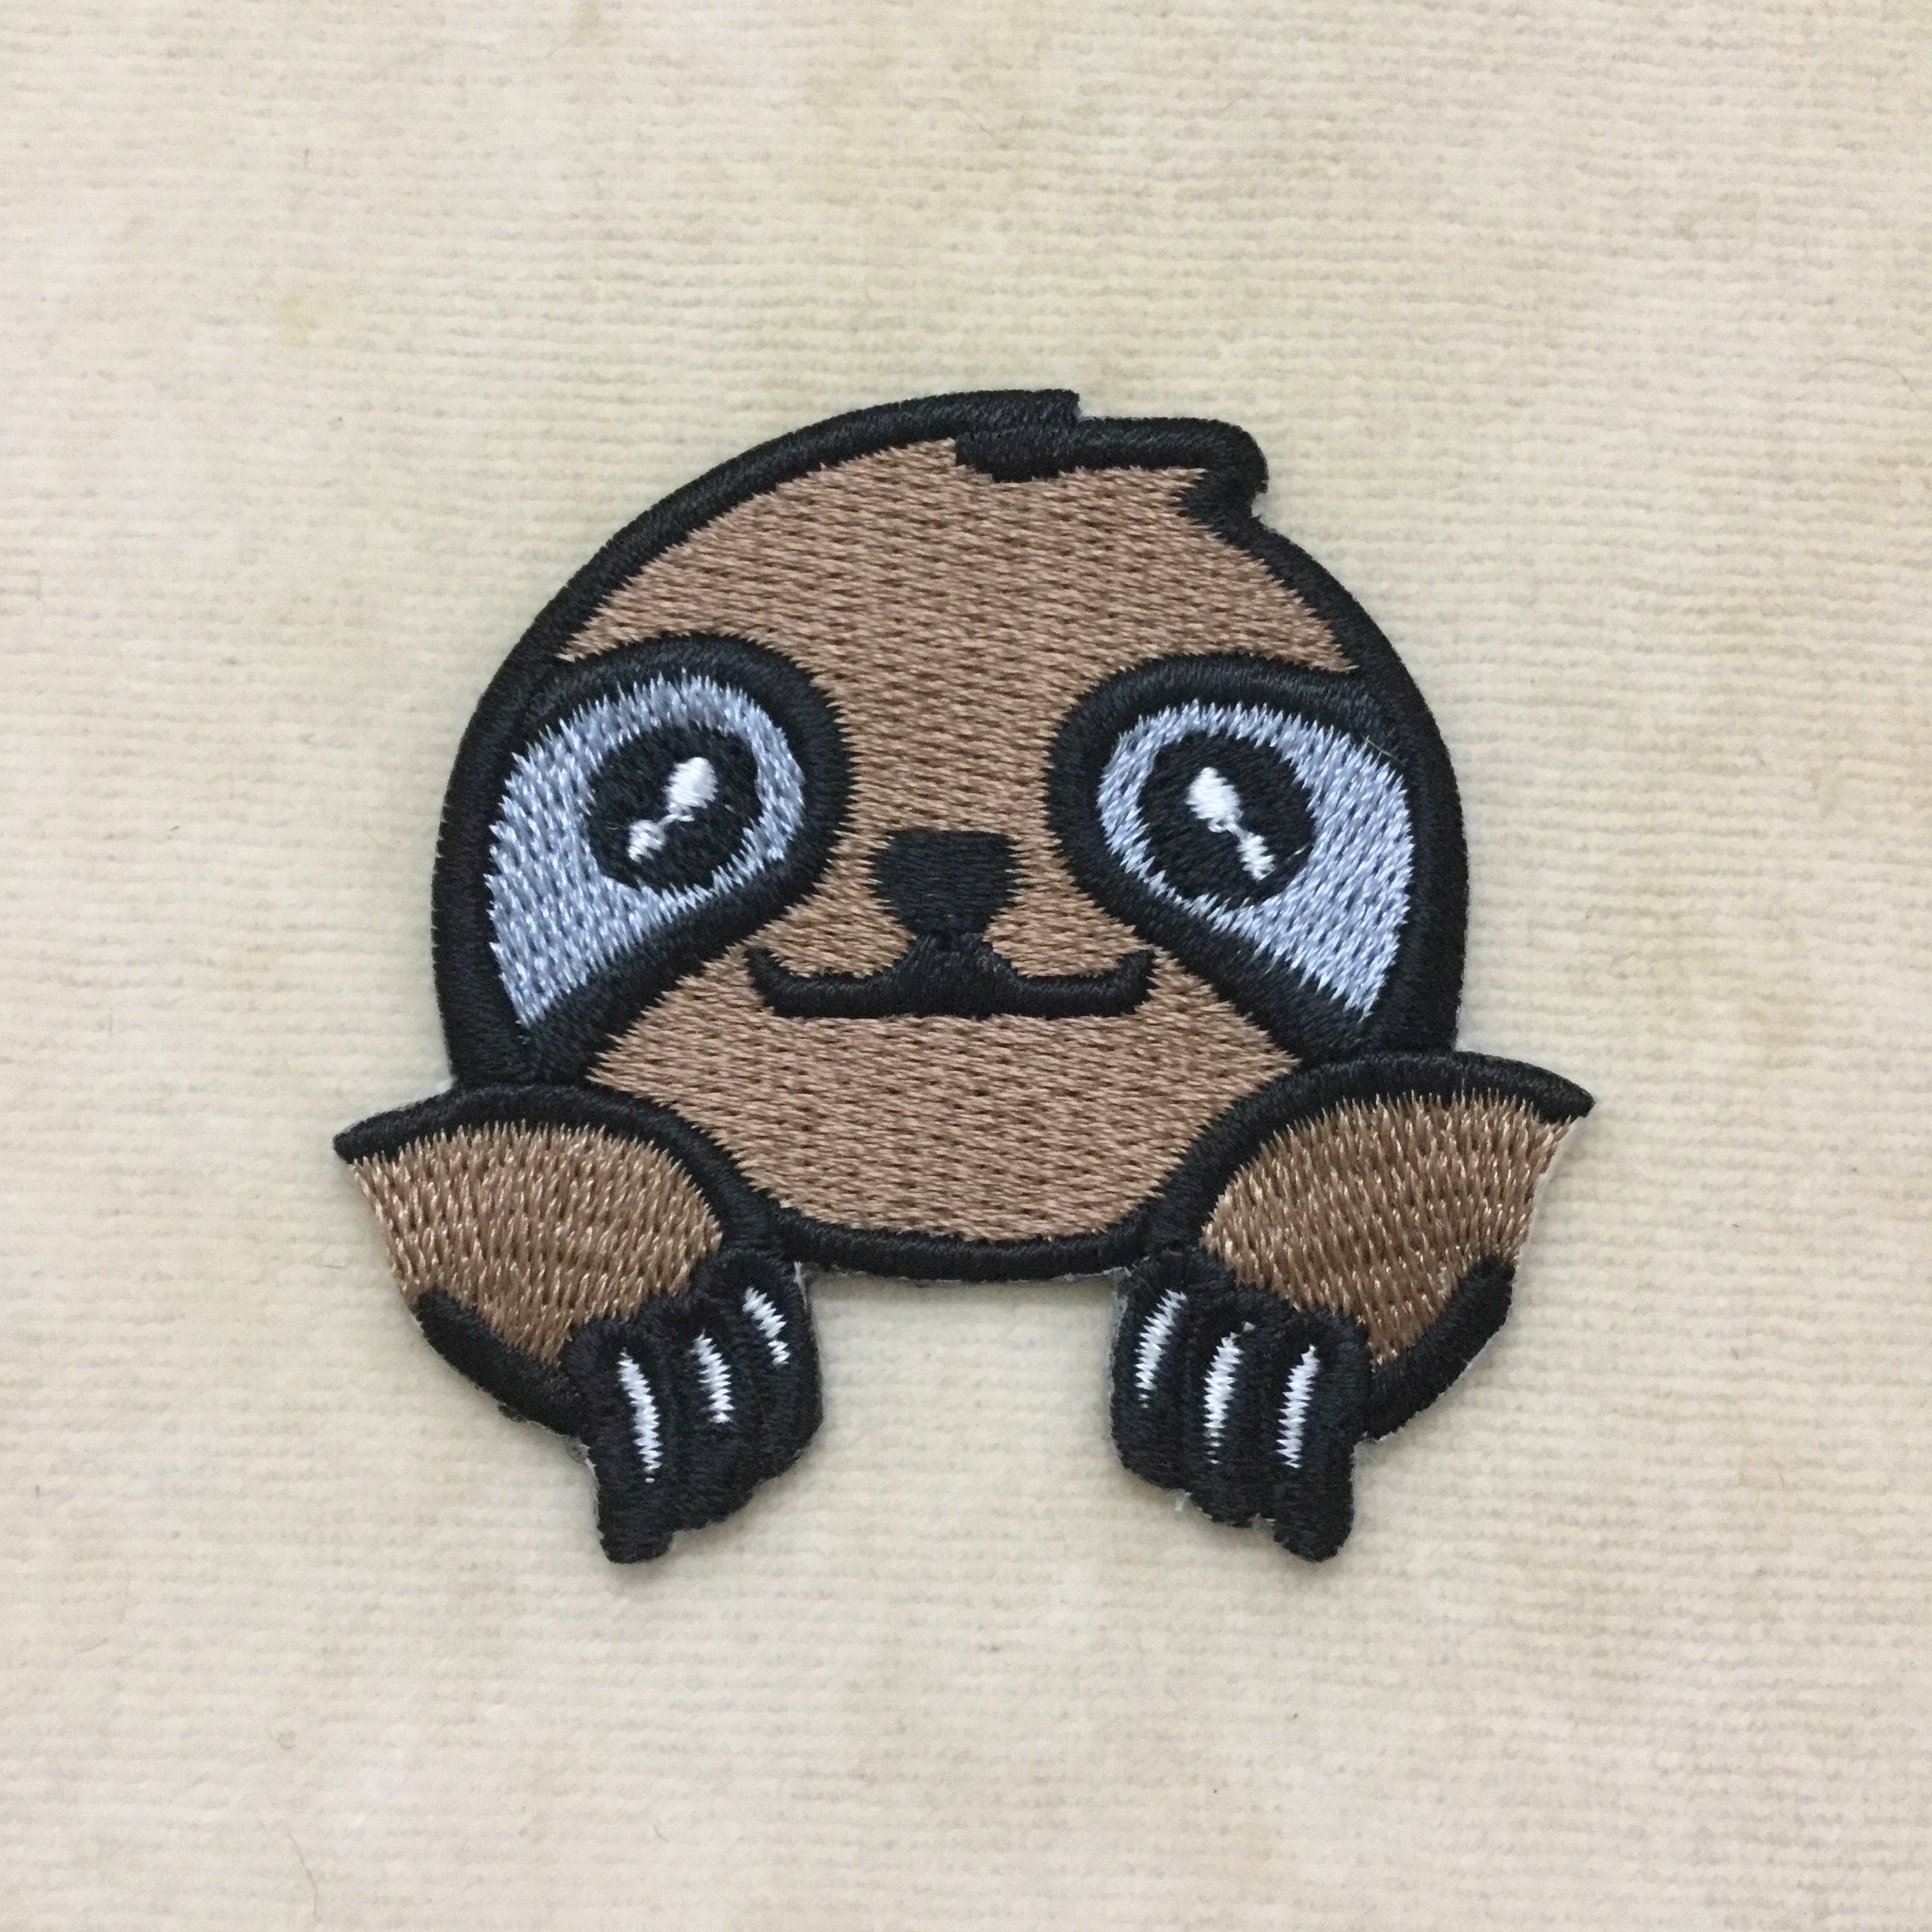 Sloth Iron on Embroidery Transfers. Cute Animal Embroidery Patterns for  Hand Embroidery. Designs Imprint Multiple Times. 